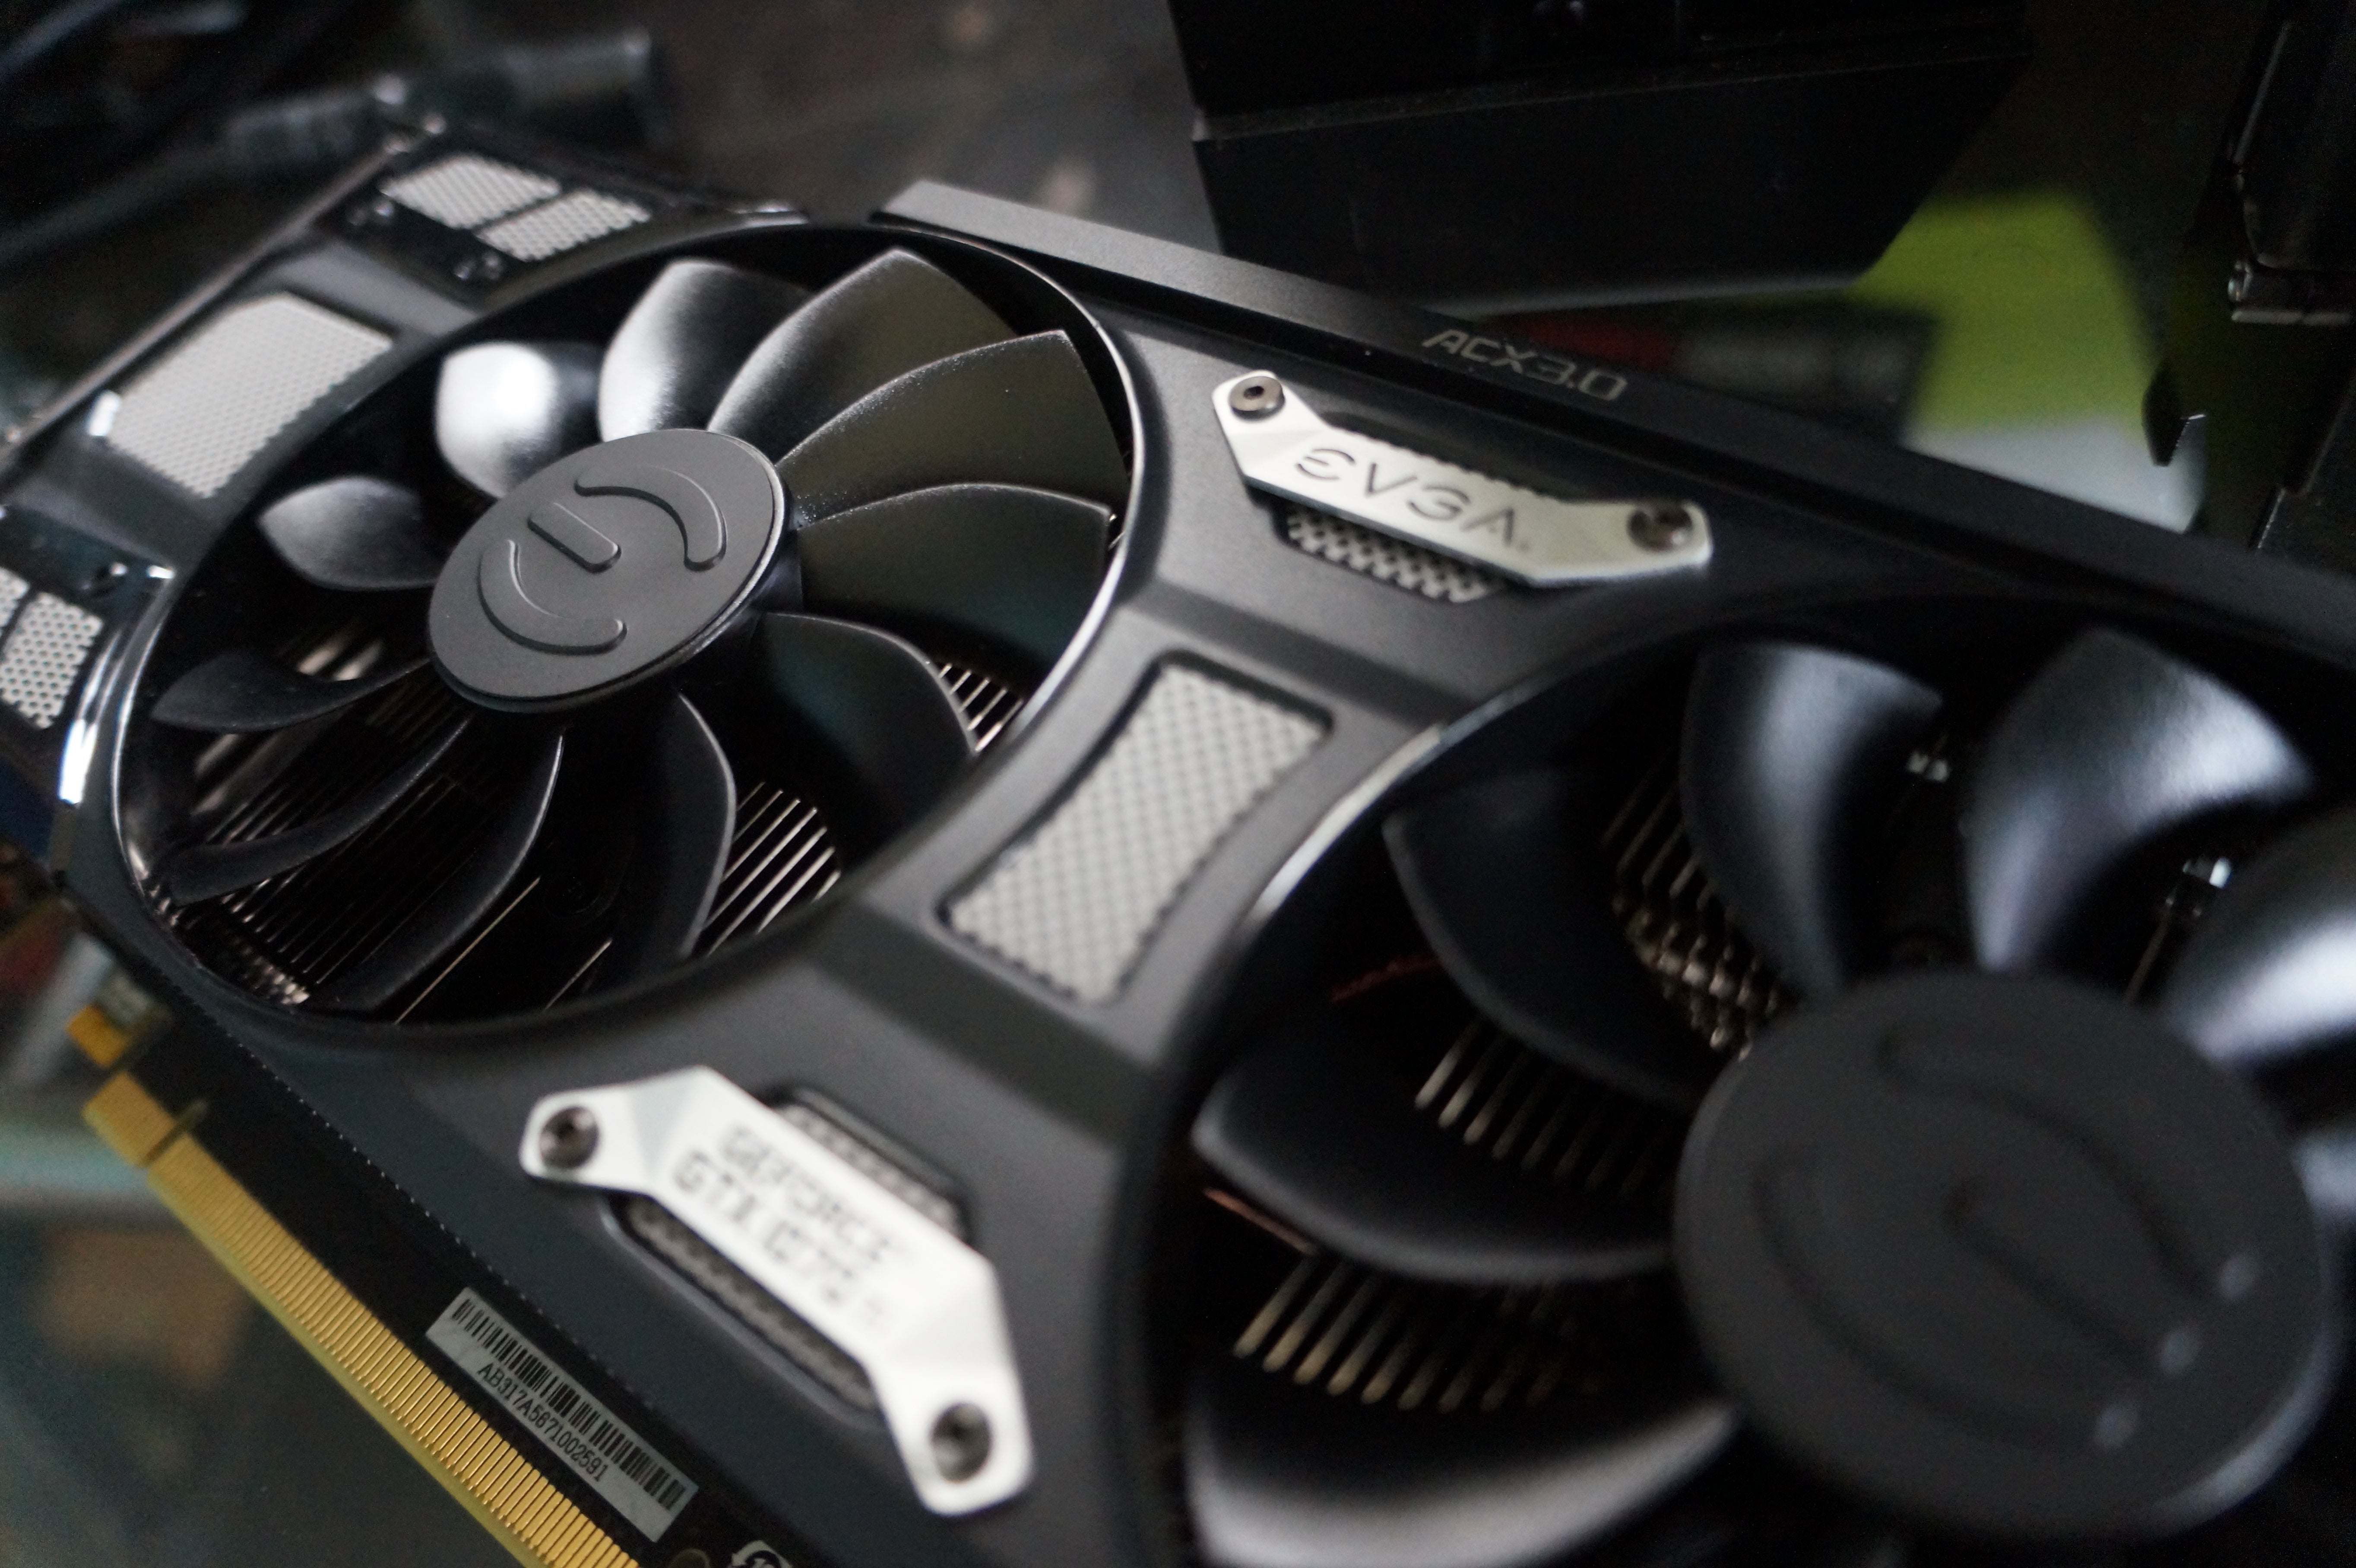 Nvidia GeForce GTX 1070 Ti review: The best 1440p graphics card | PCWorld